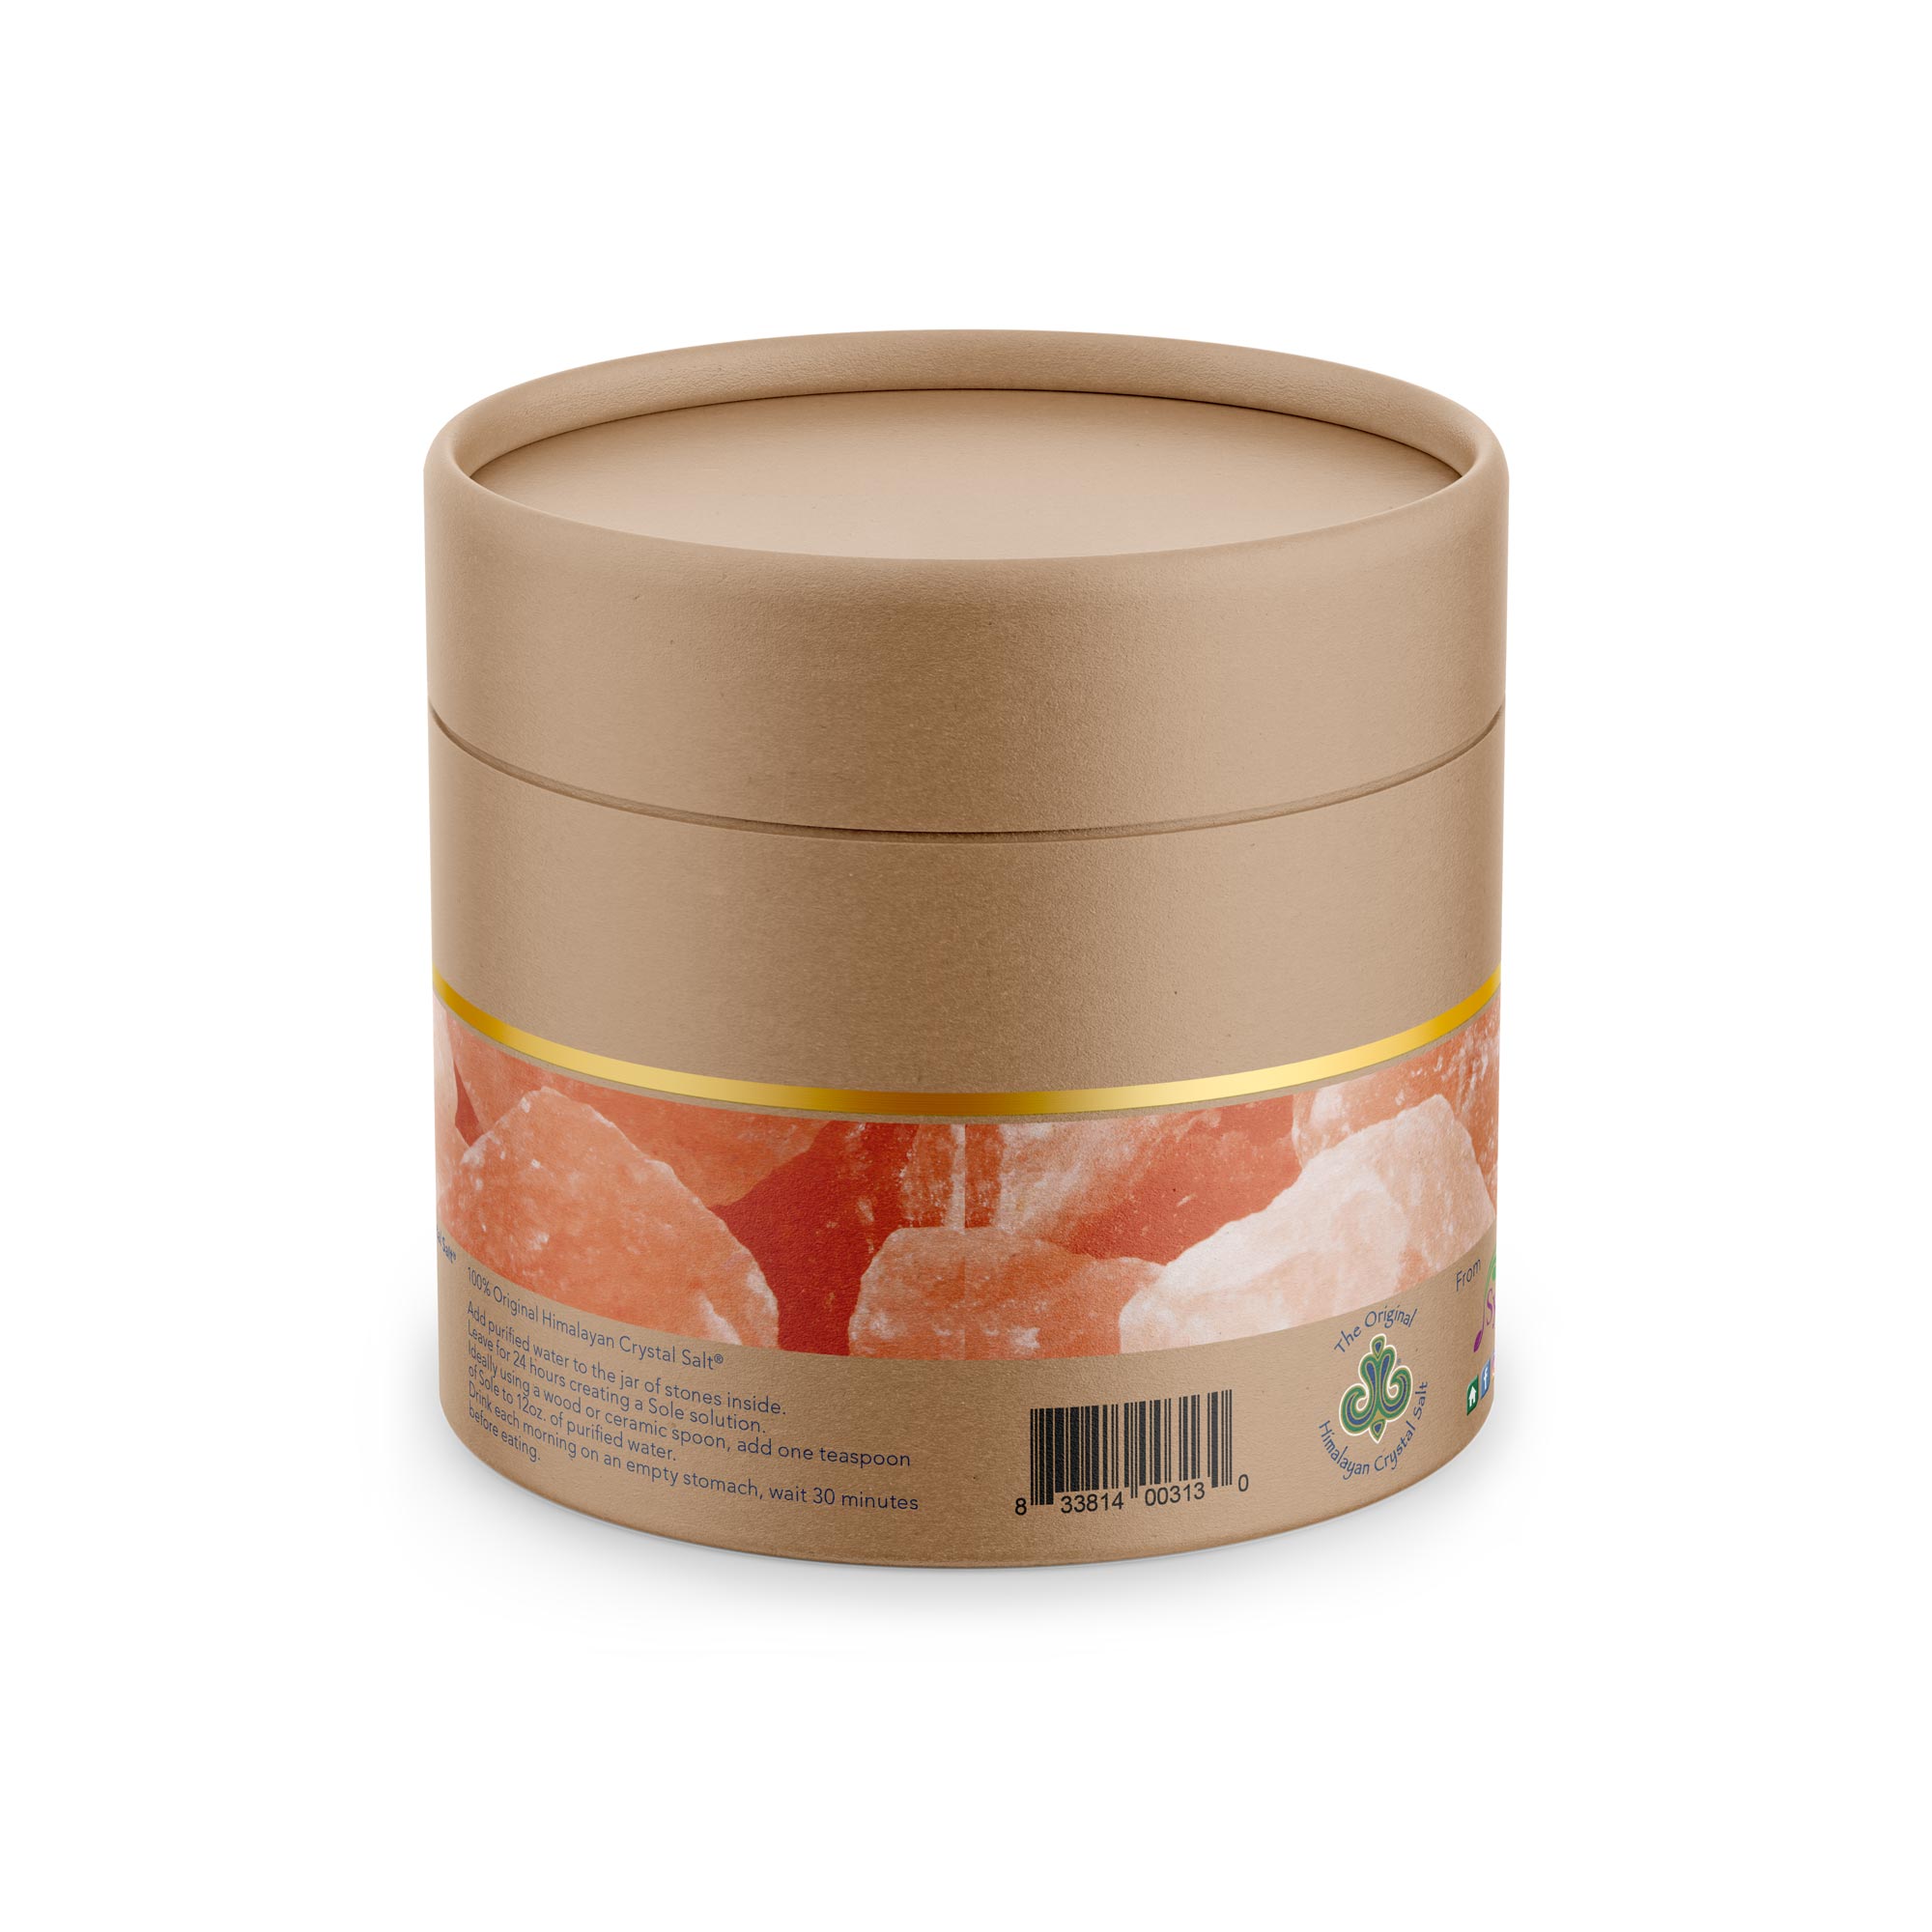 Himalayan Salt Intro Pack back of box cylindrical shape, tan with band of gold and showing Himalayan Salt stones and logo